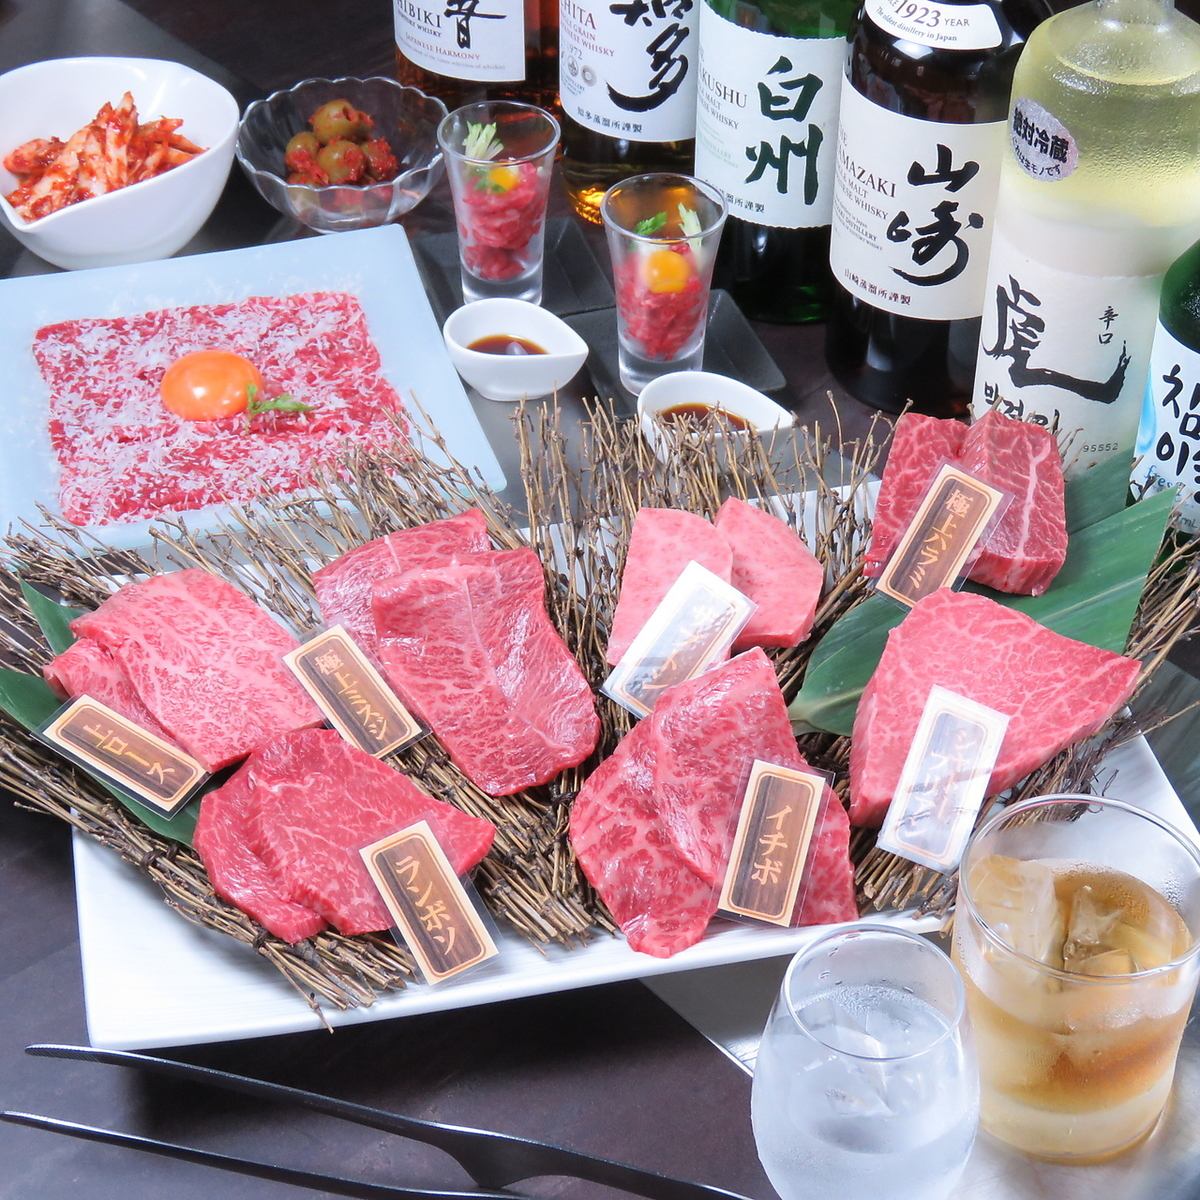 [NEW OPEN in Yotsuya 3-chome] Enjoy the finest Japanese beef and the craftsman's cuisine that creates delicious food!